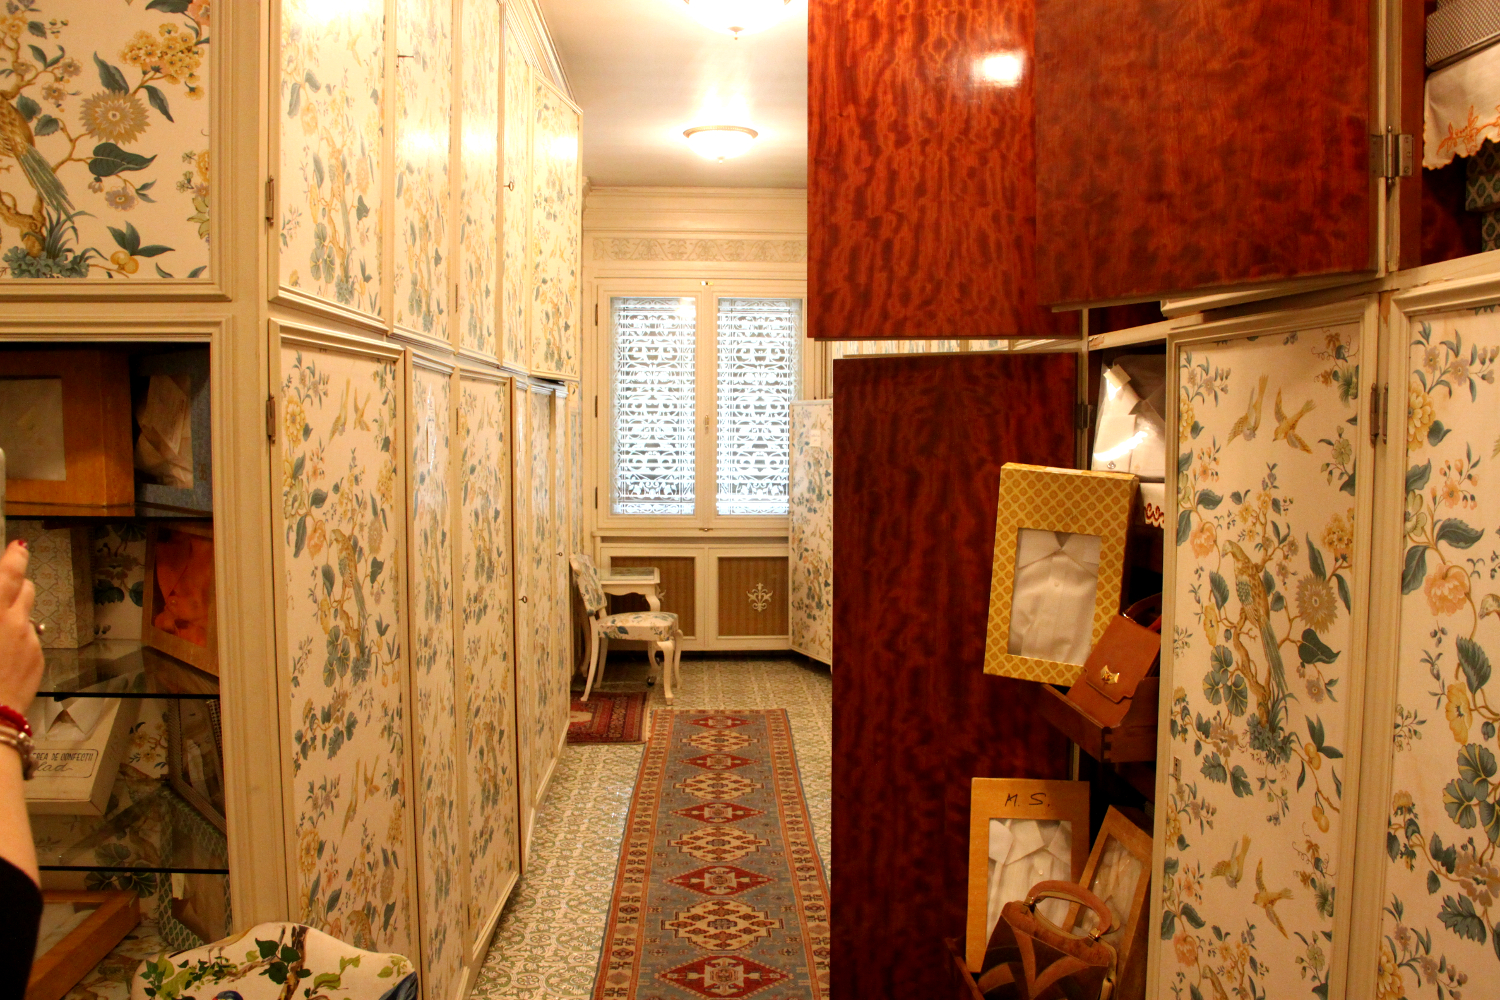 Primaverii (Spring) Palace, Ceausescu’s private residence - "La Cuci" - a living room, a dressing room, and fitting room